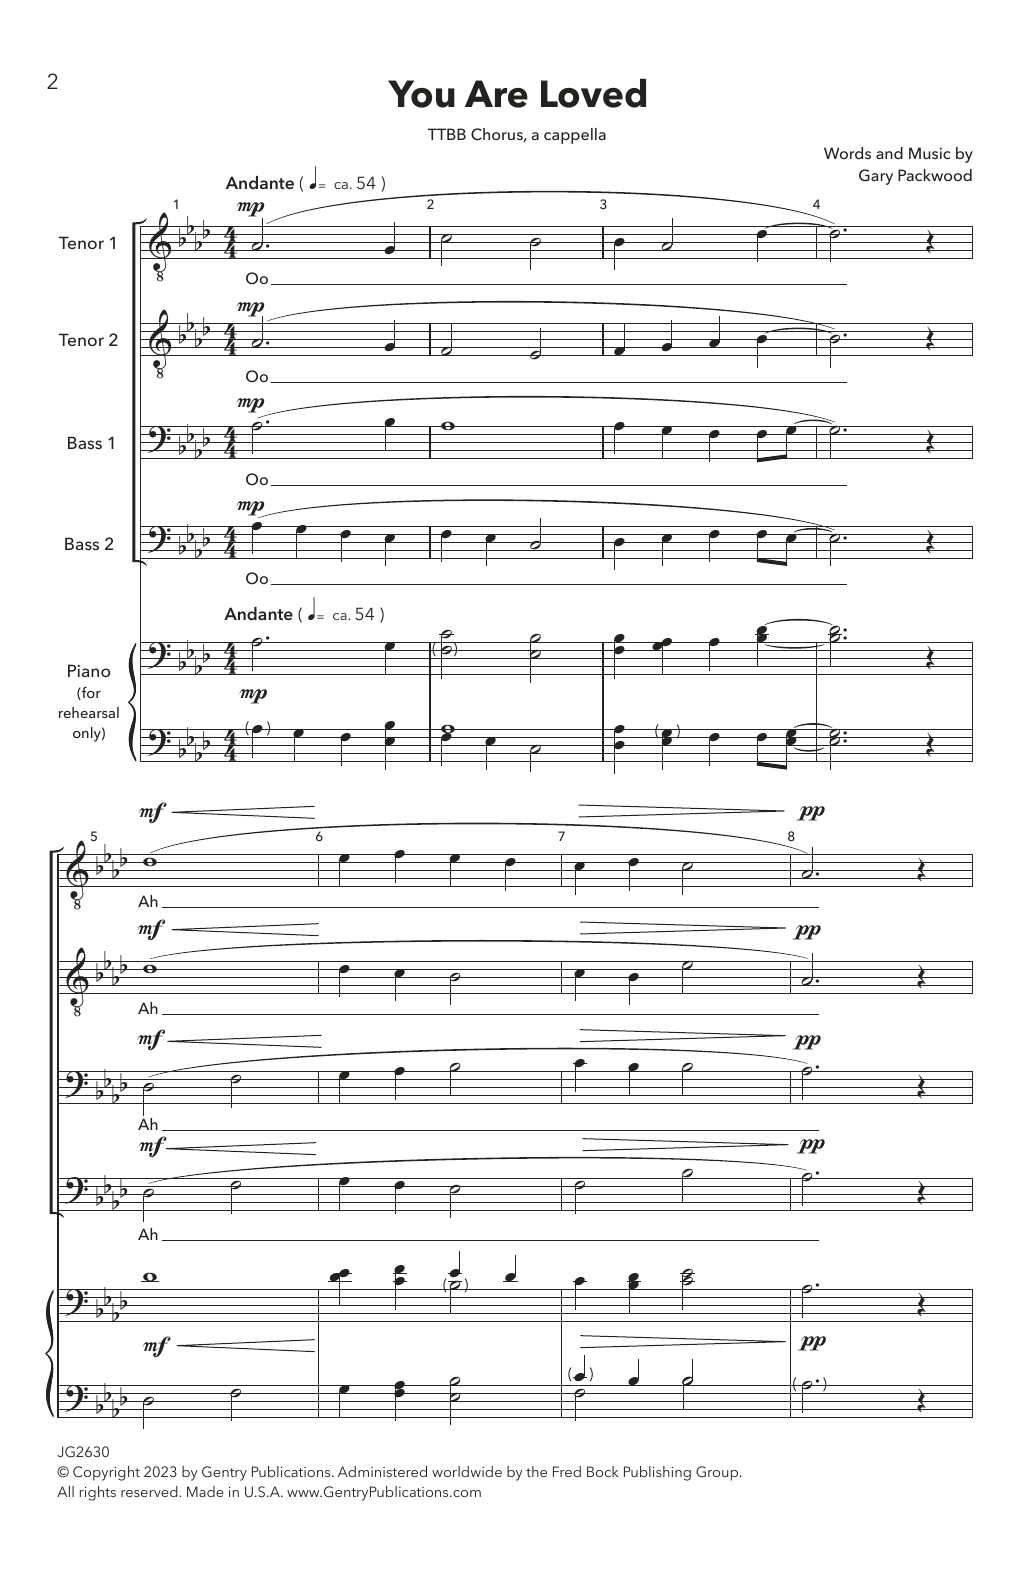 Download Gary Packwood You Are Loved Sheet Music